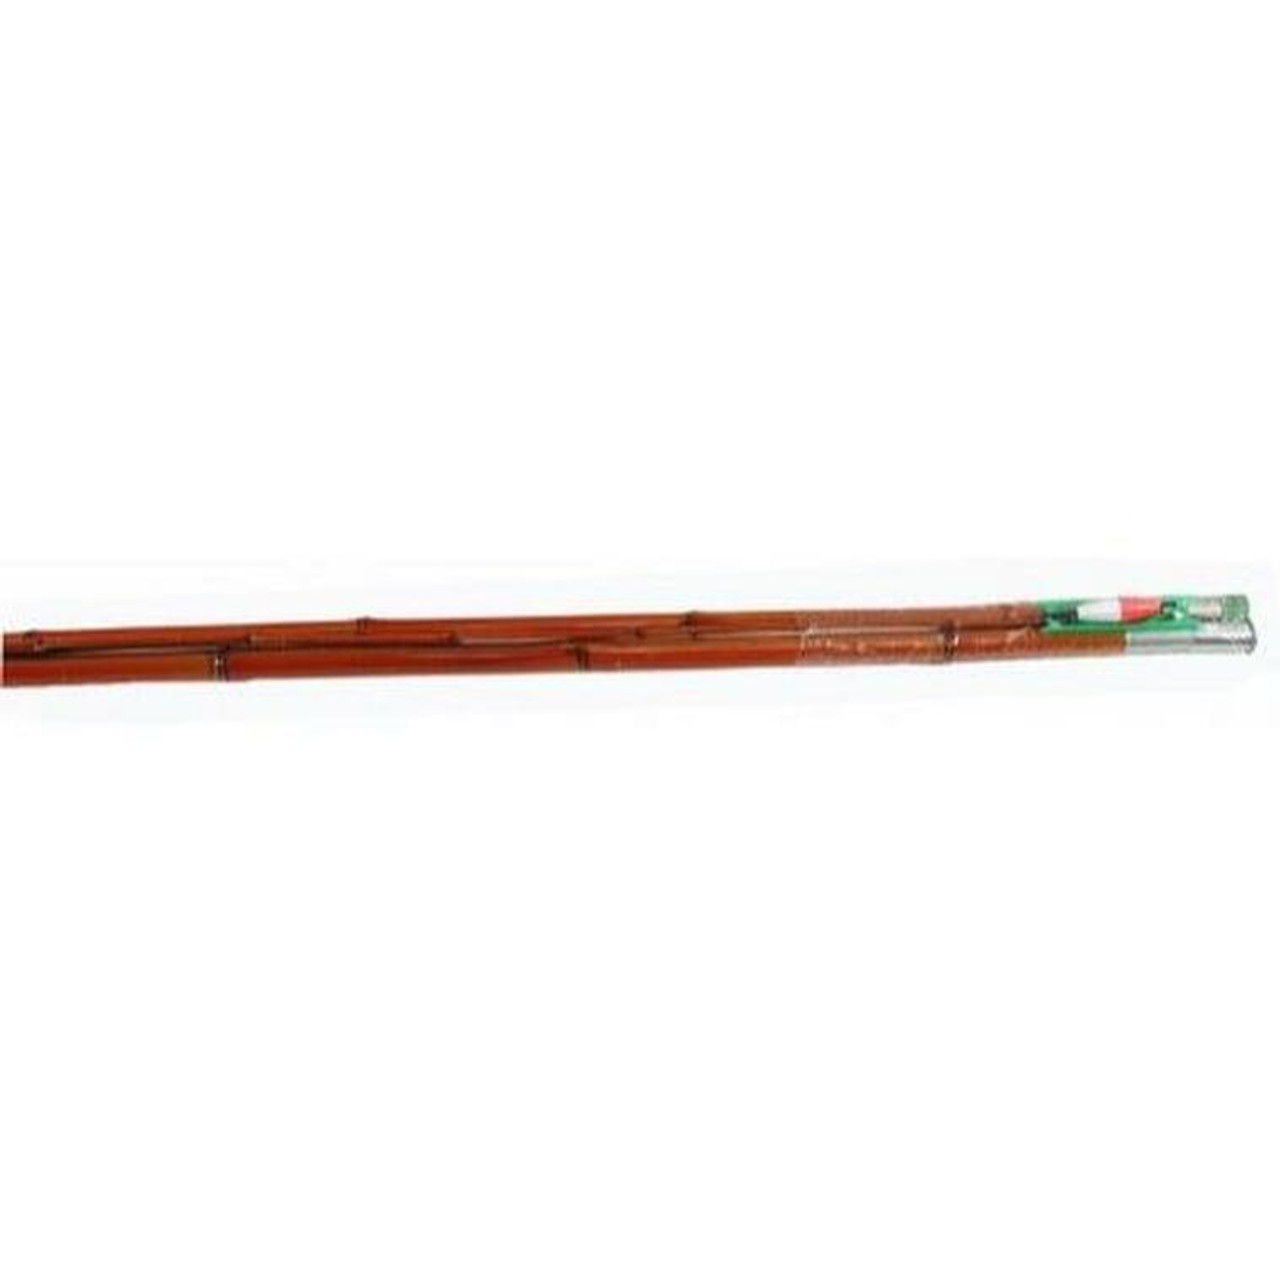 BnM Jointed Bamboo Cane Poles